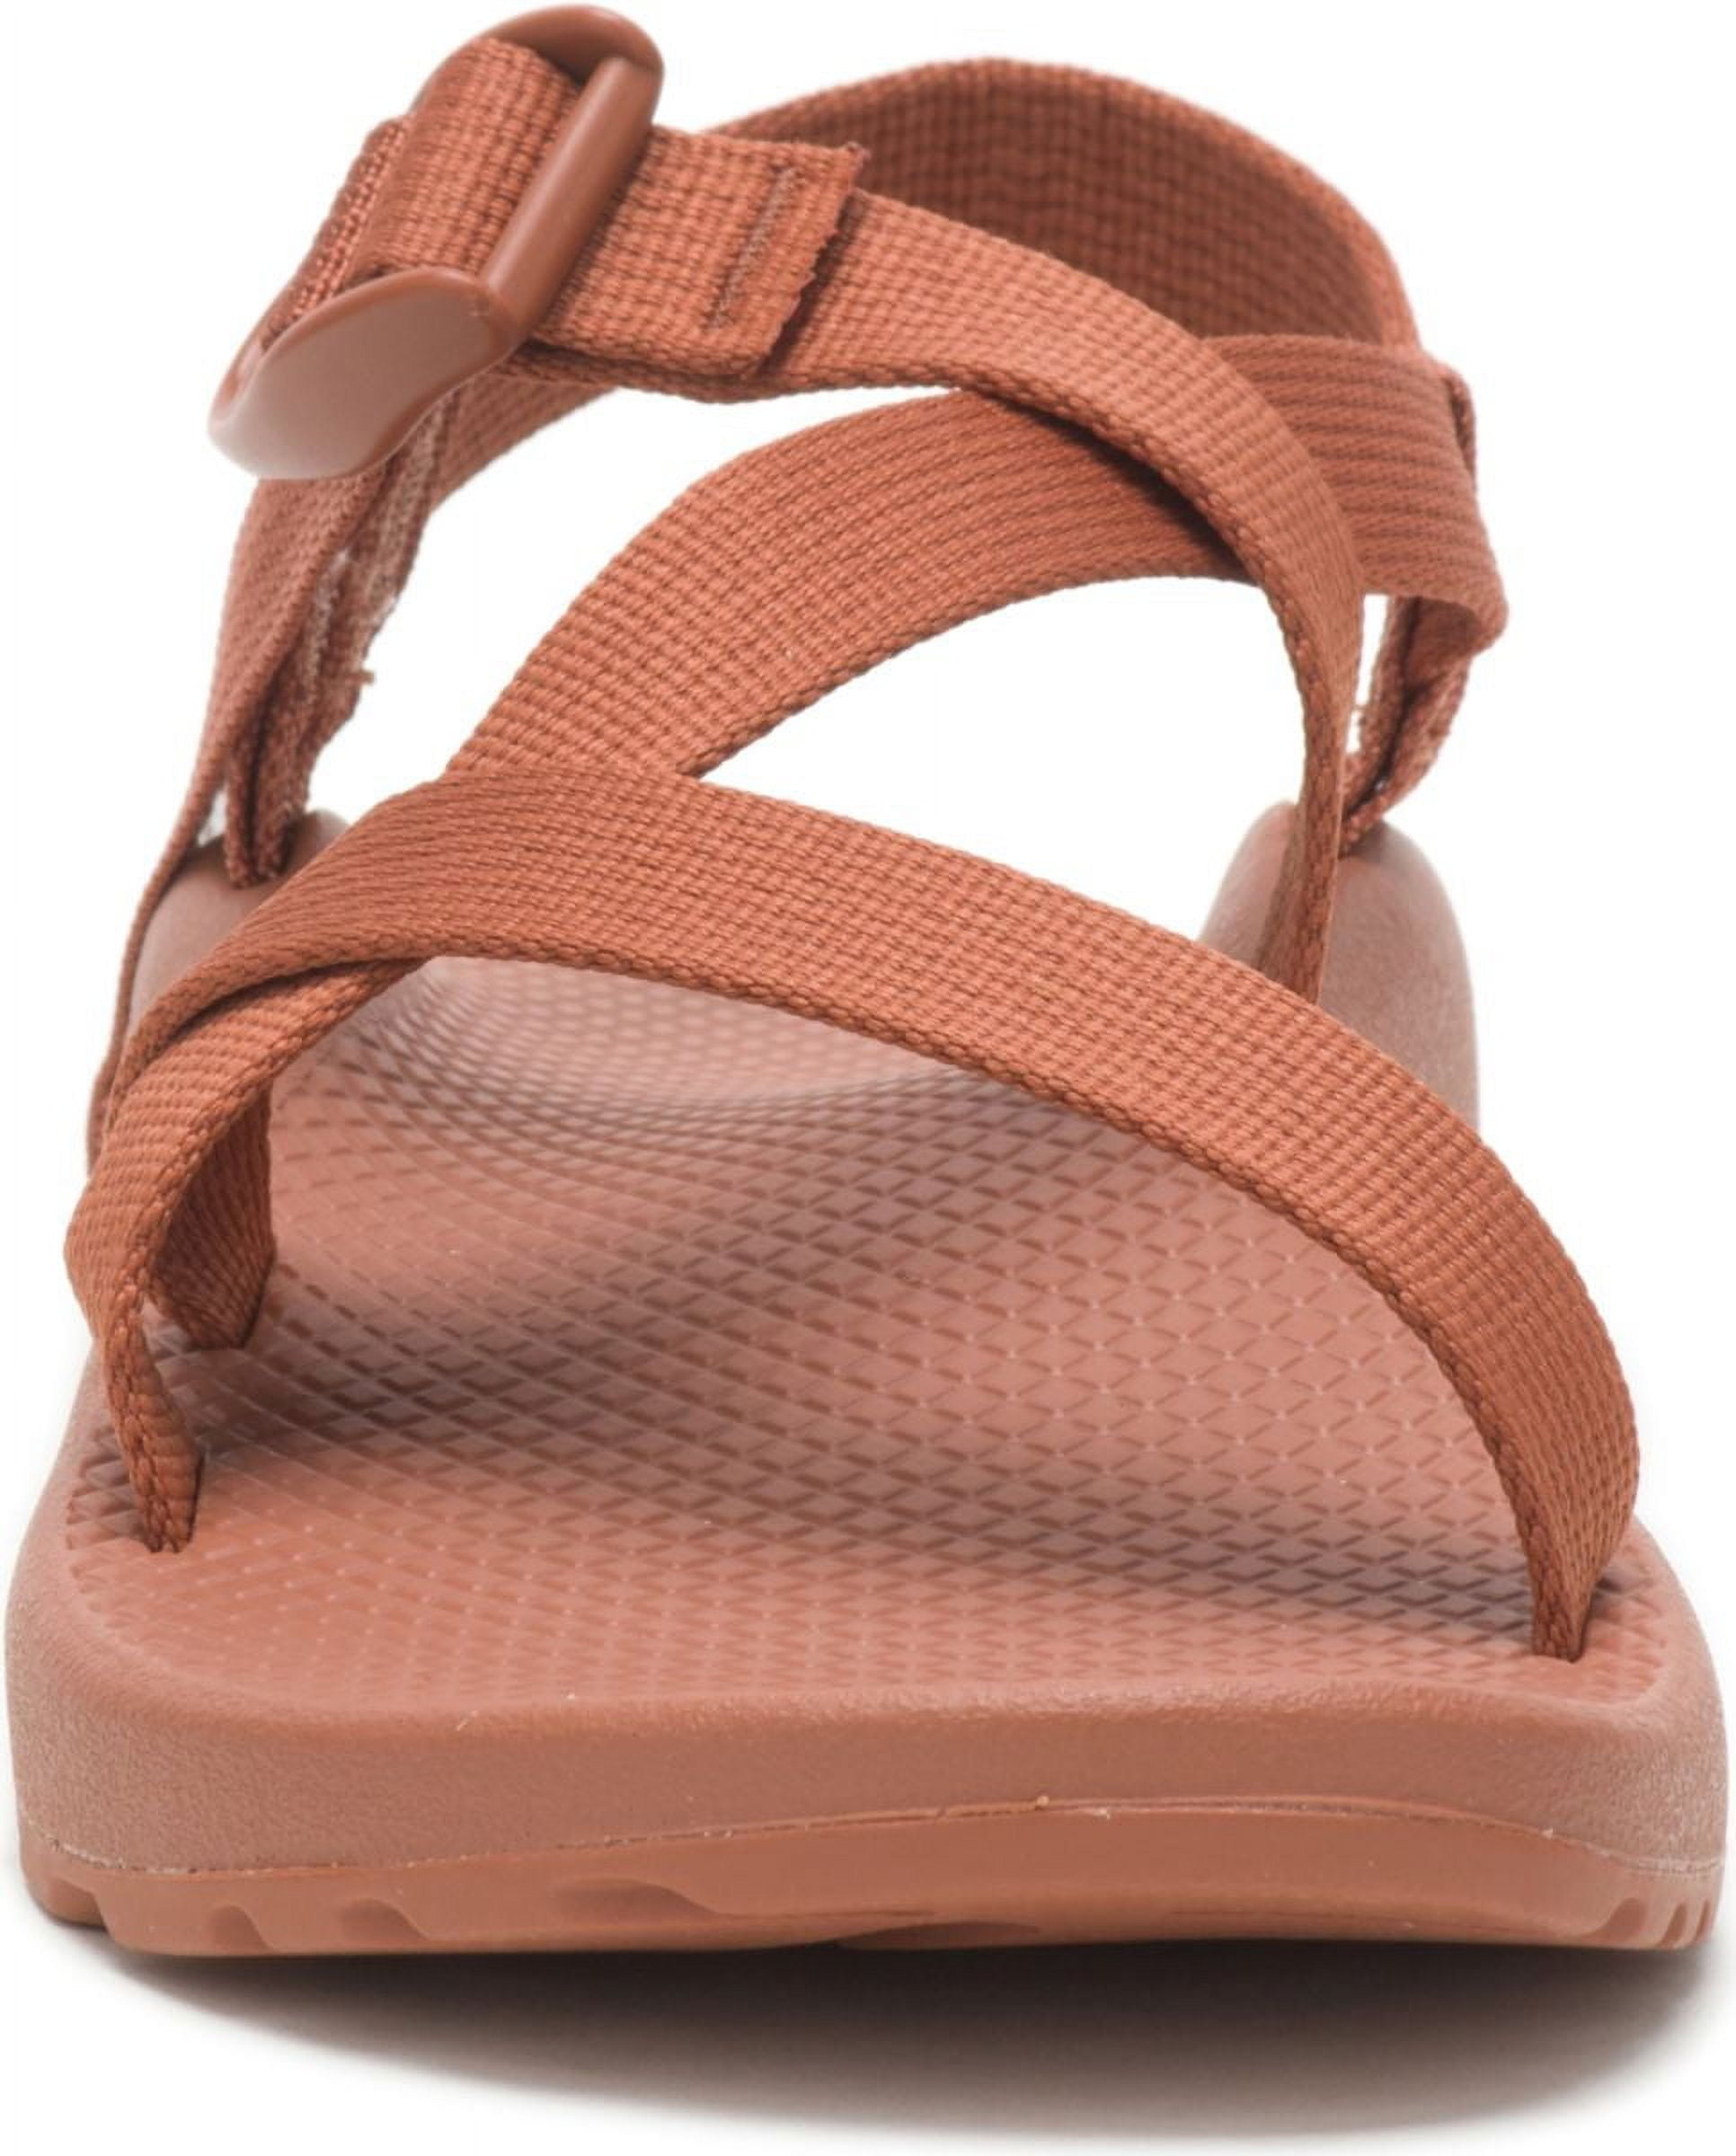 Chaco - Z/1 Classic - Bone Brown - Surf and Dirt